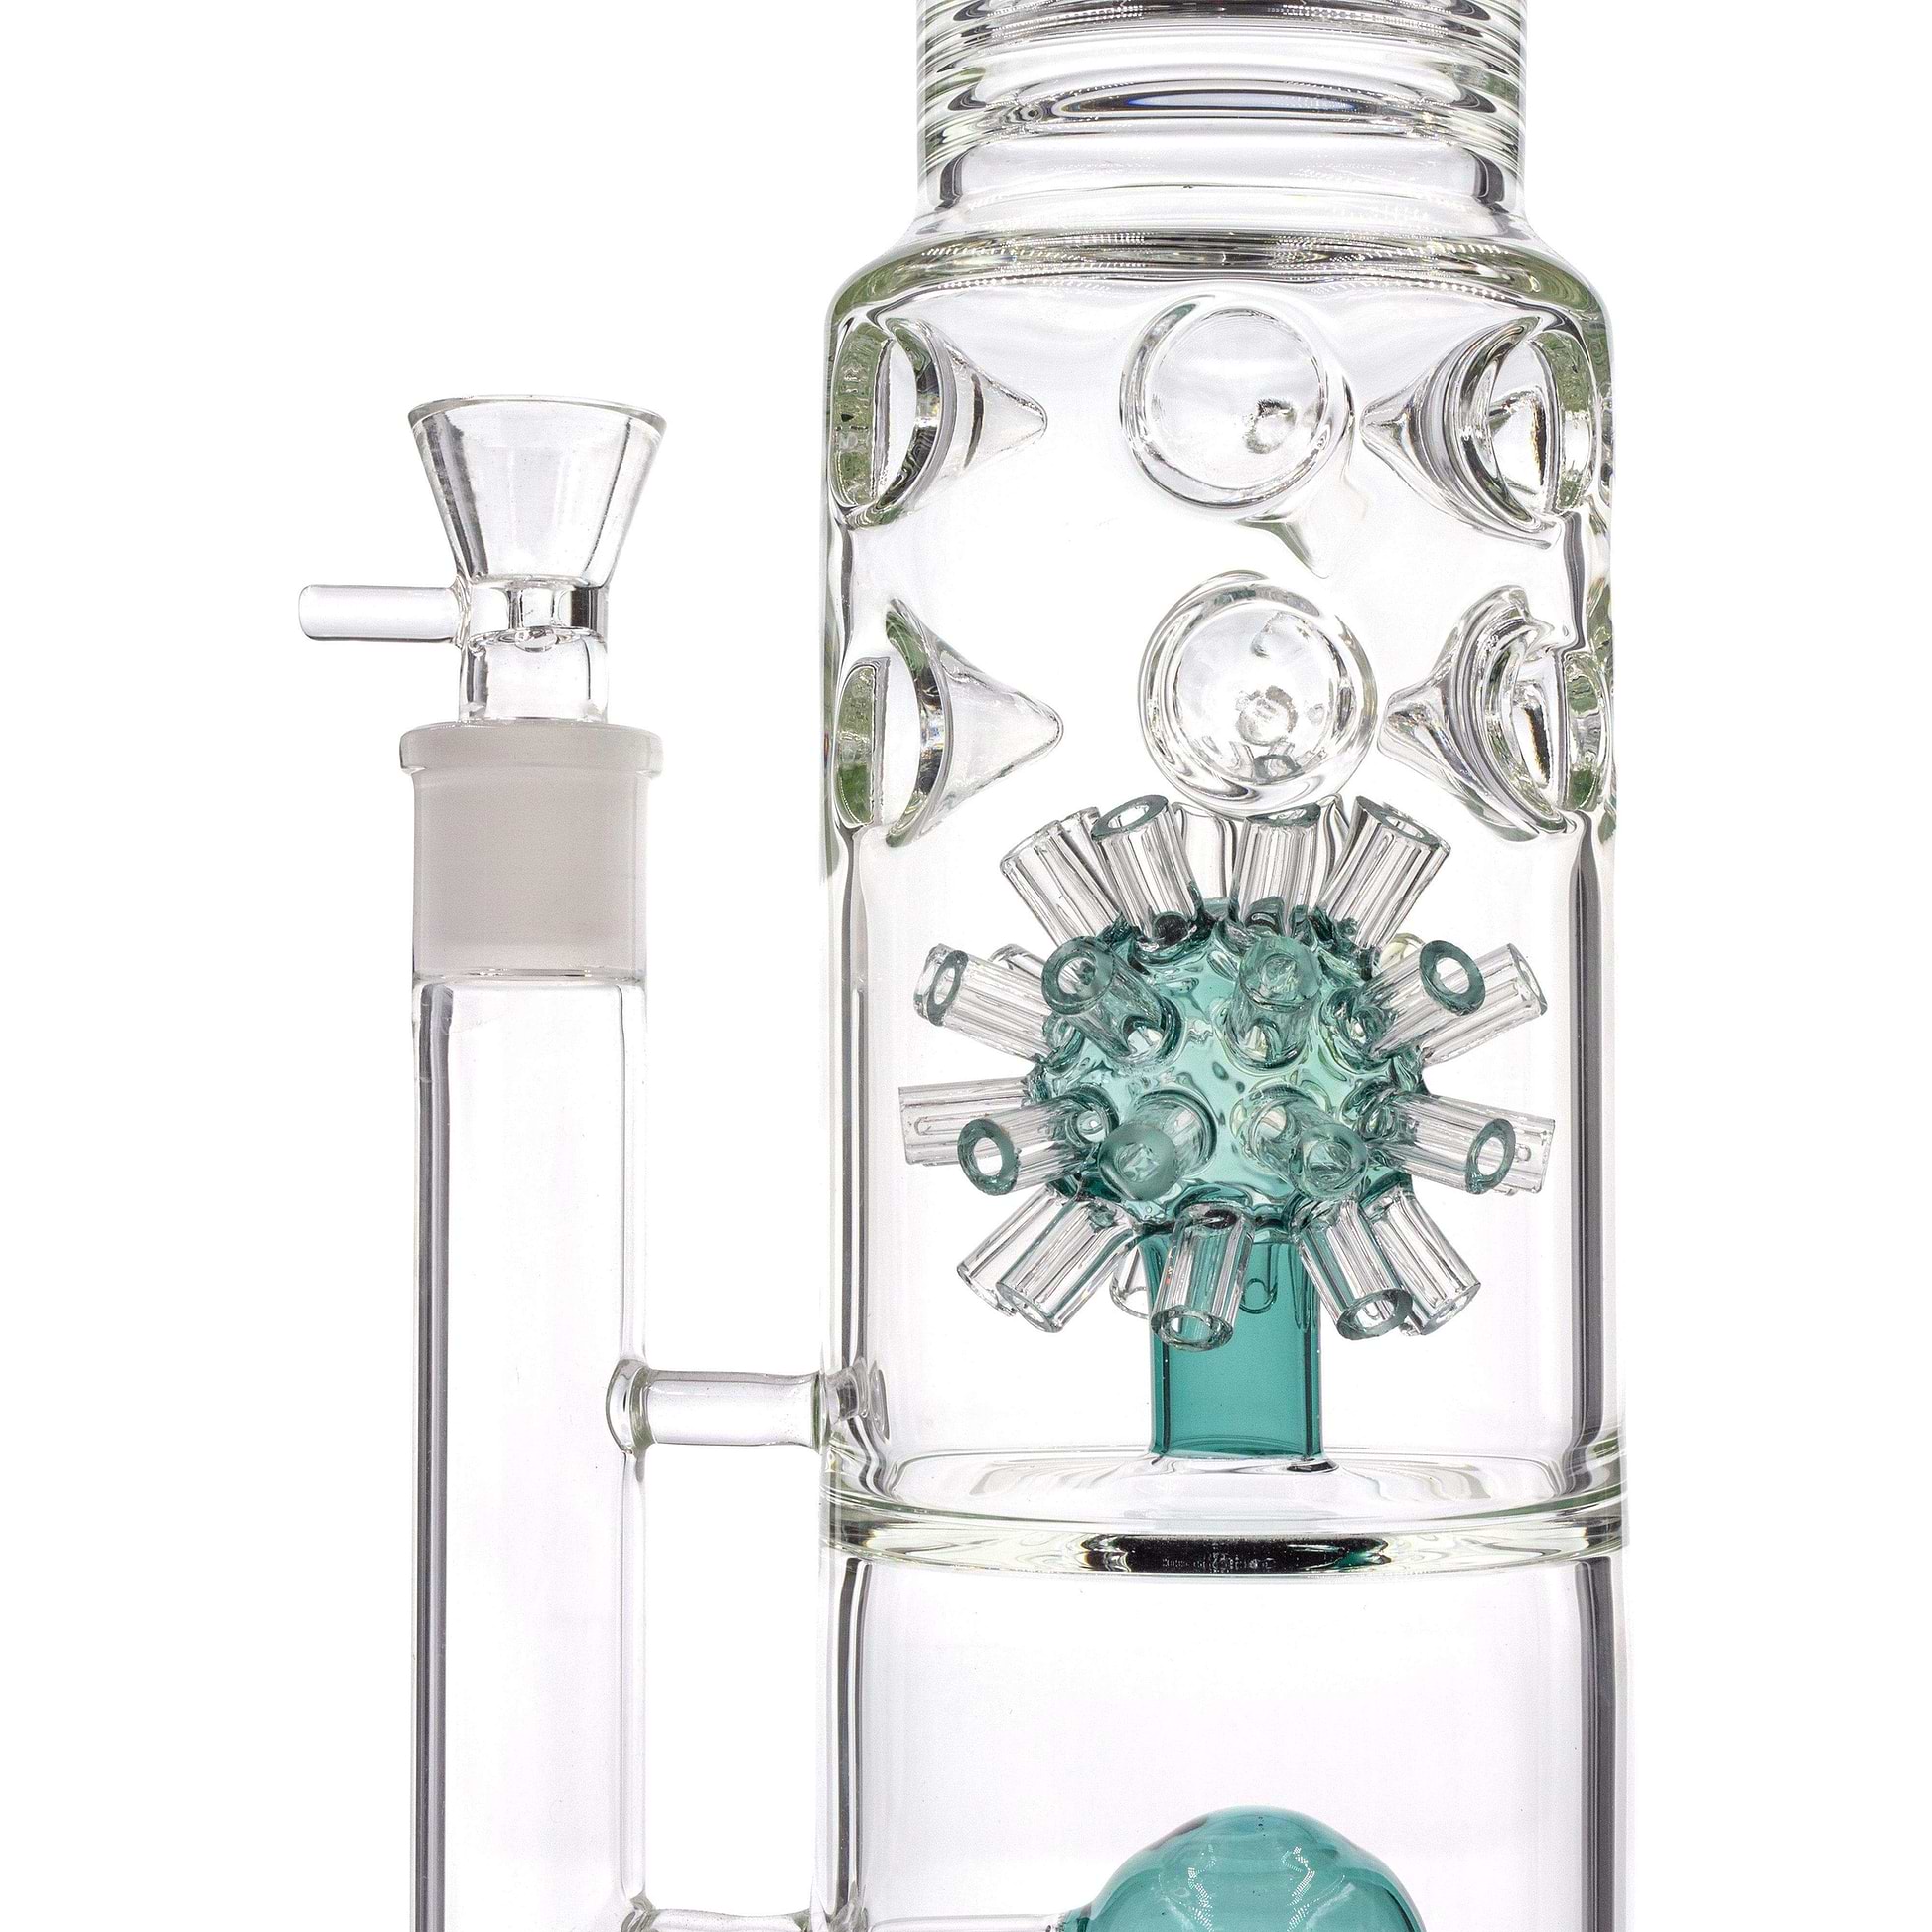 Teal Huge 19-inch glass bong close up on 2 percs unique diffision morning star perc